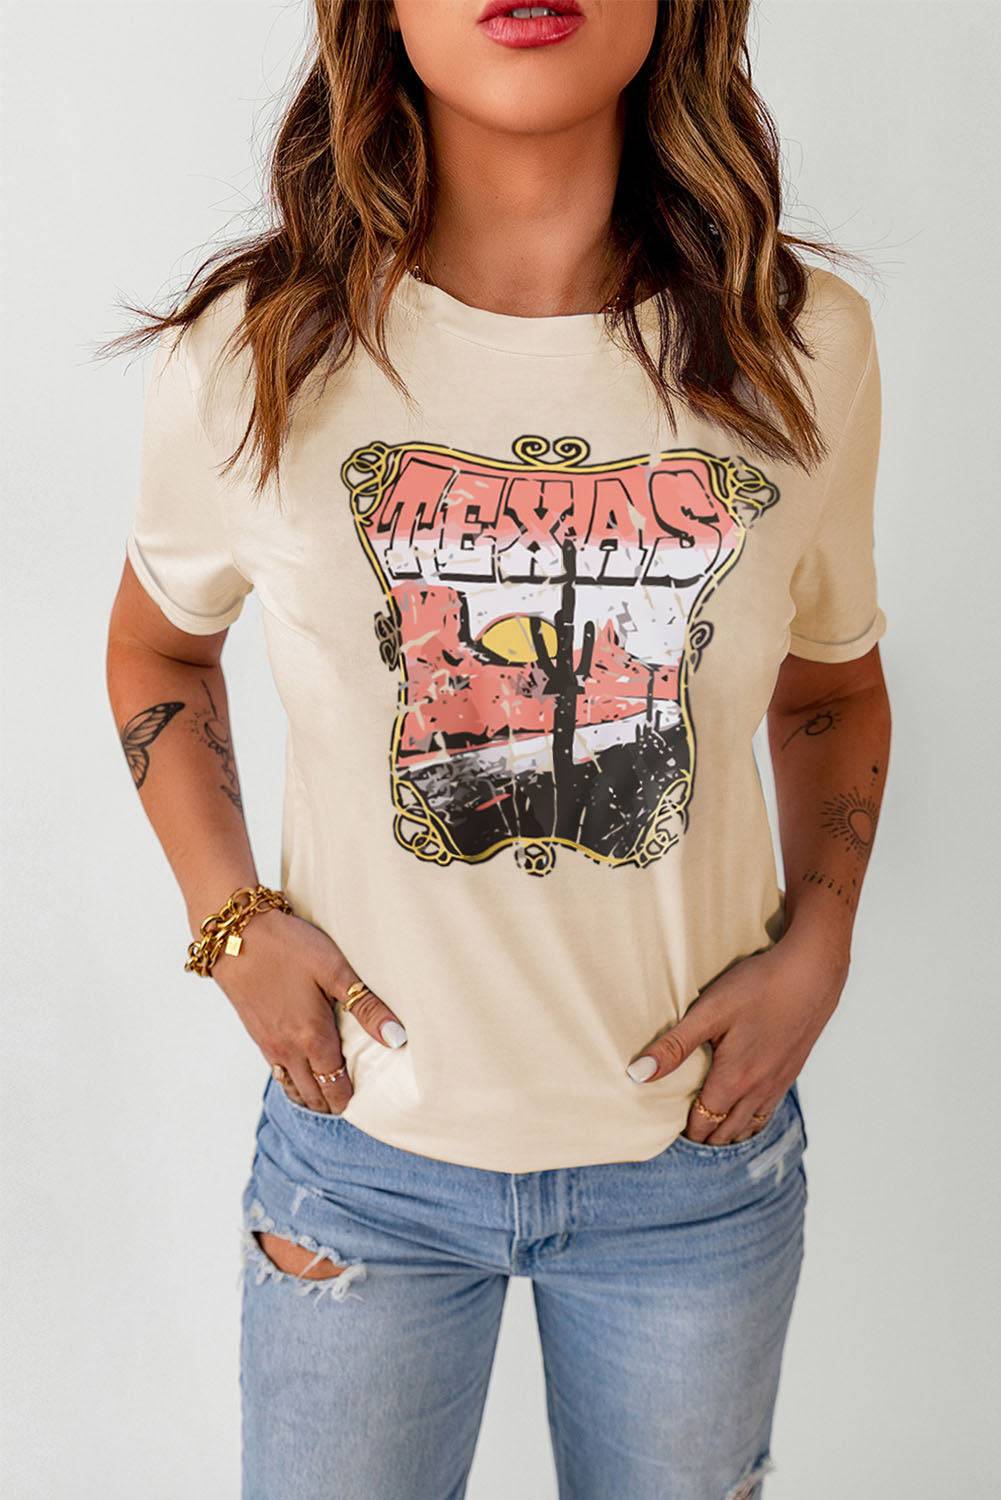 Indulge in Mesmerizing Charm with the Texas Graphic Cuffed Tee Shirt - Flatter your Curves and Turn Heads with a Passionate Ode to the Lone Star State - Guy Christopher